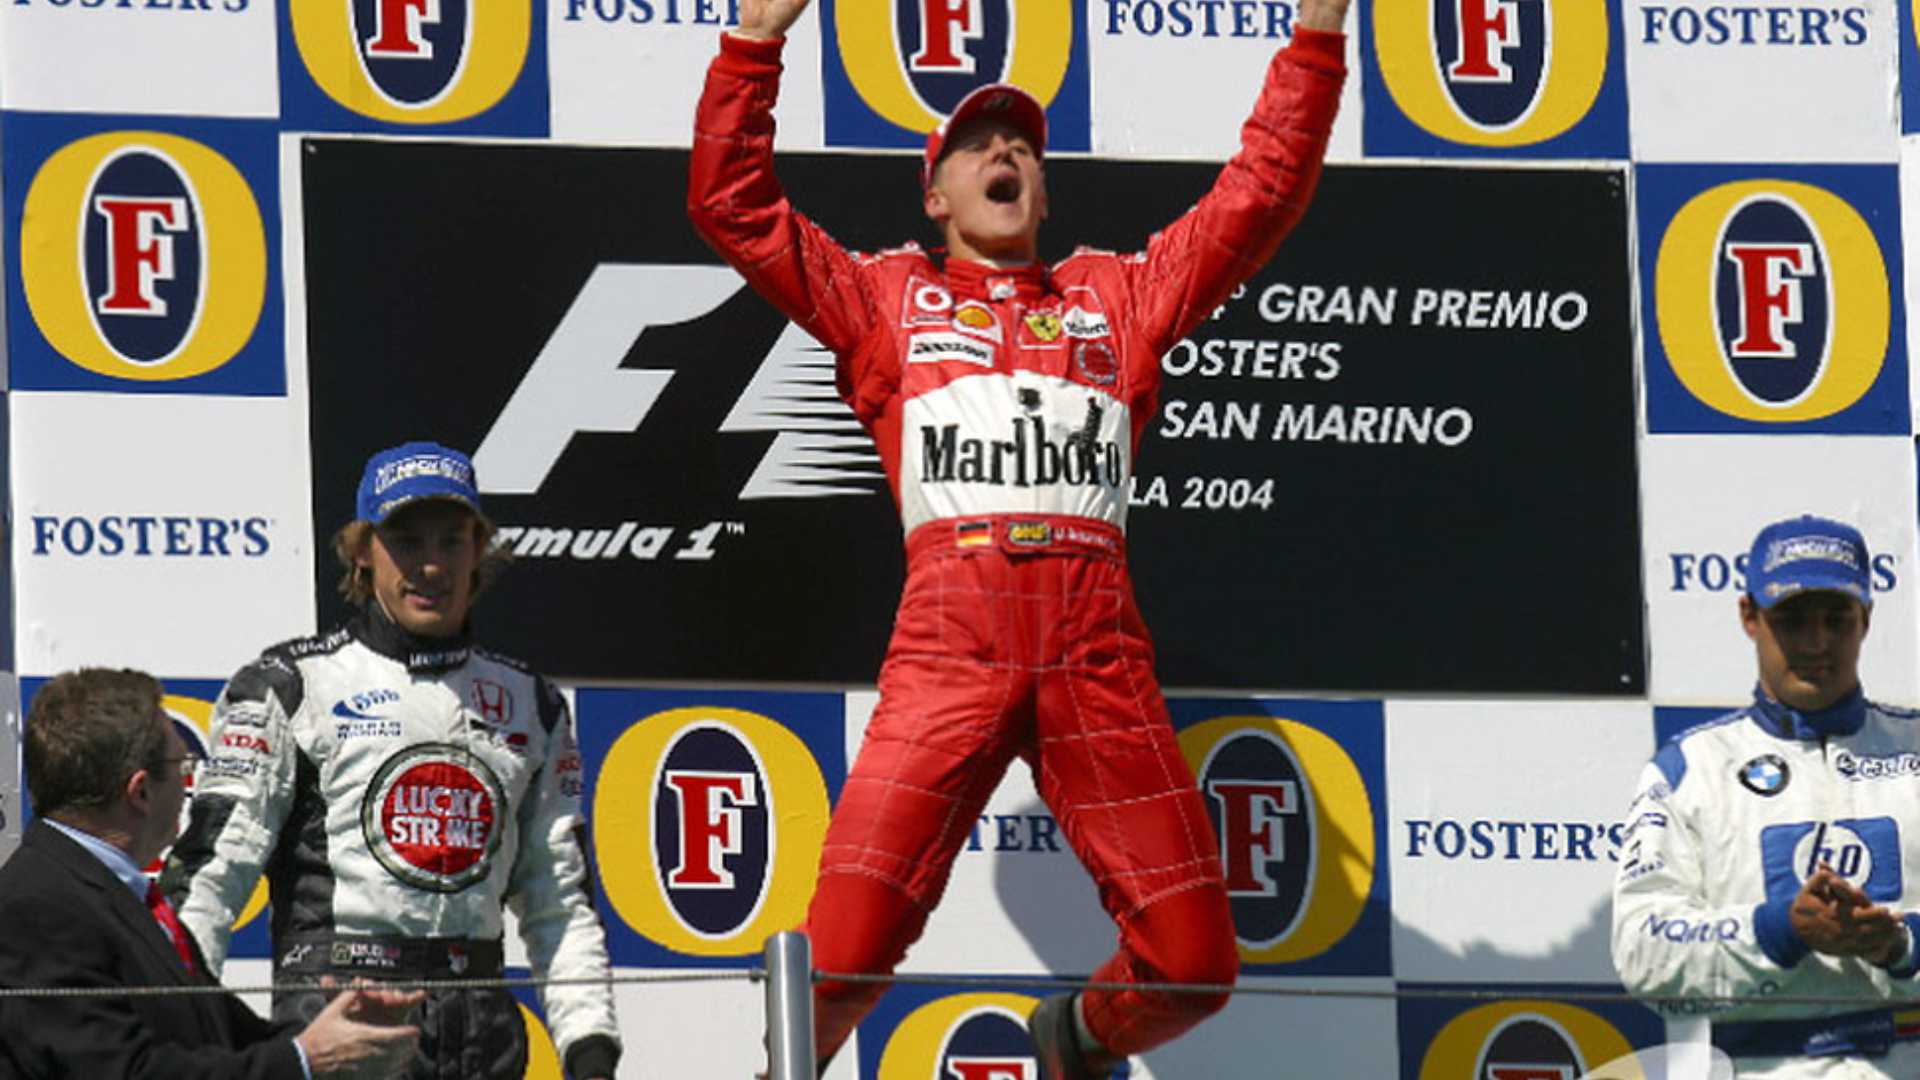 Michael Schumacher is the greatest F1 driver of all time with seven world titles but he had some controversial moments.